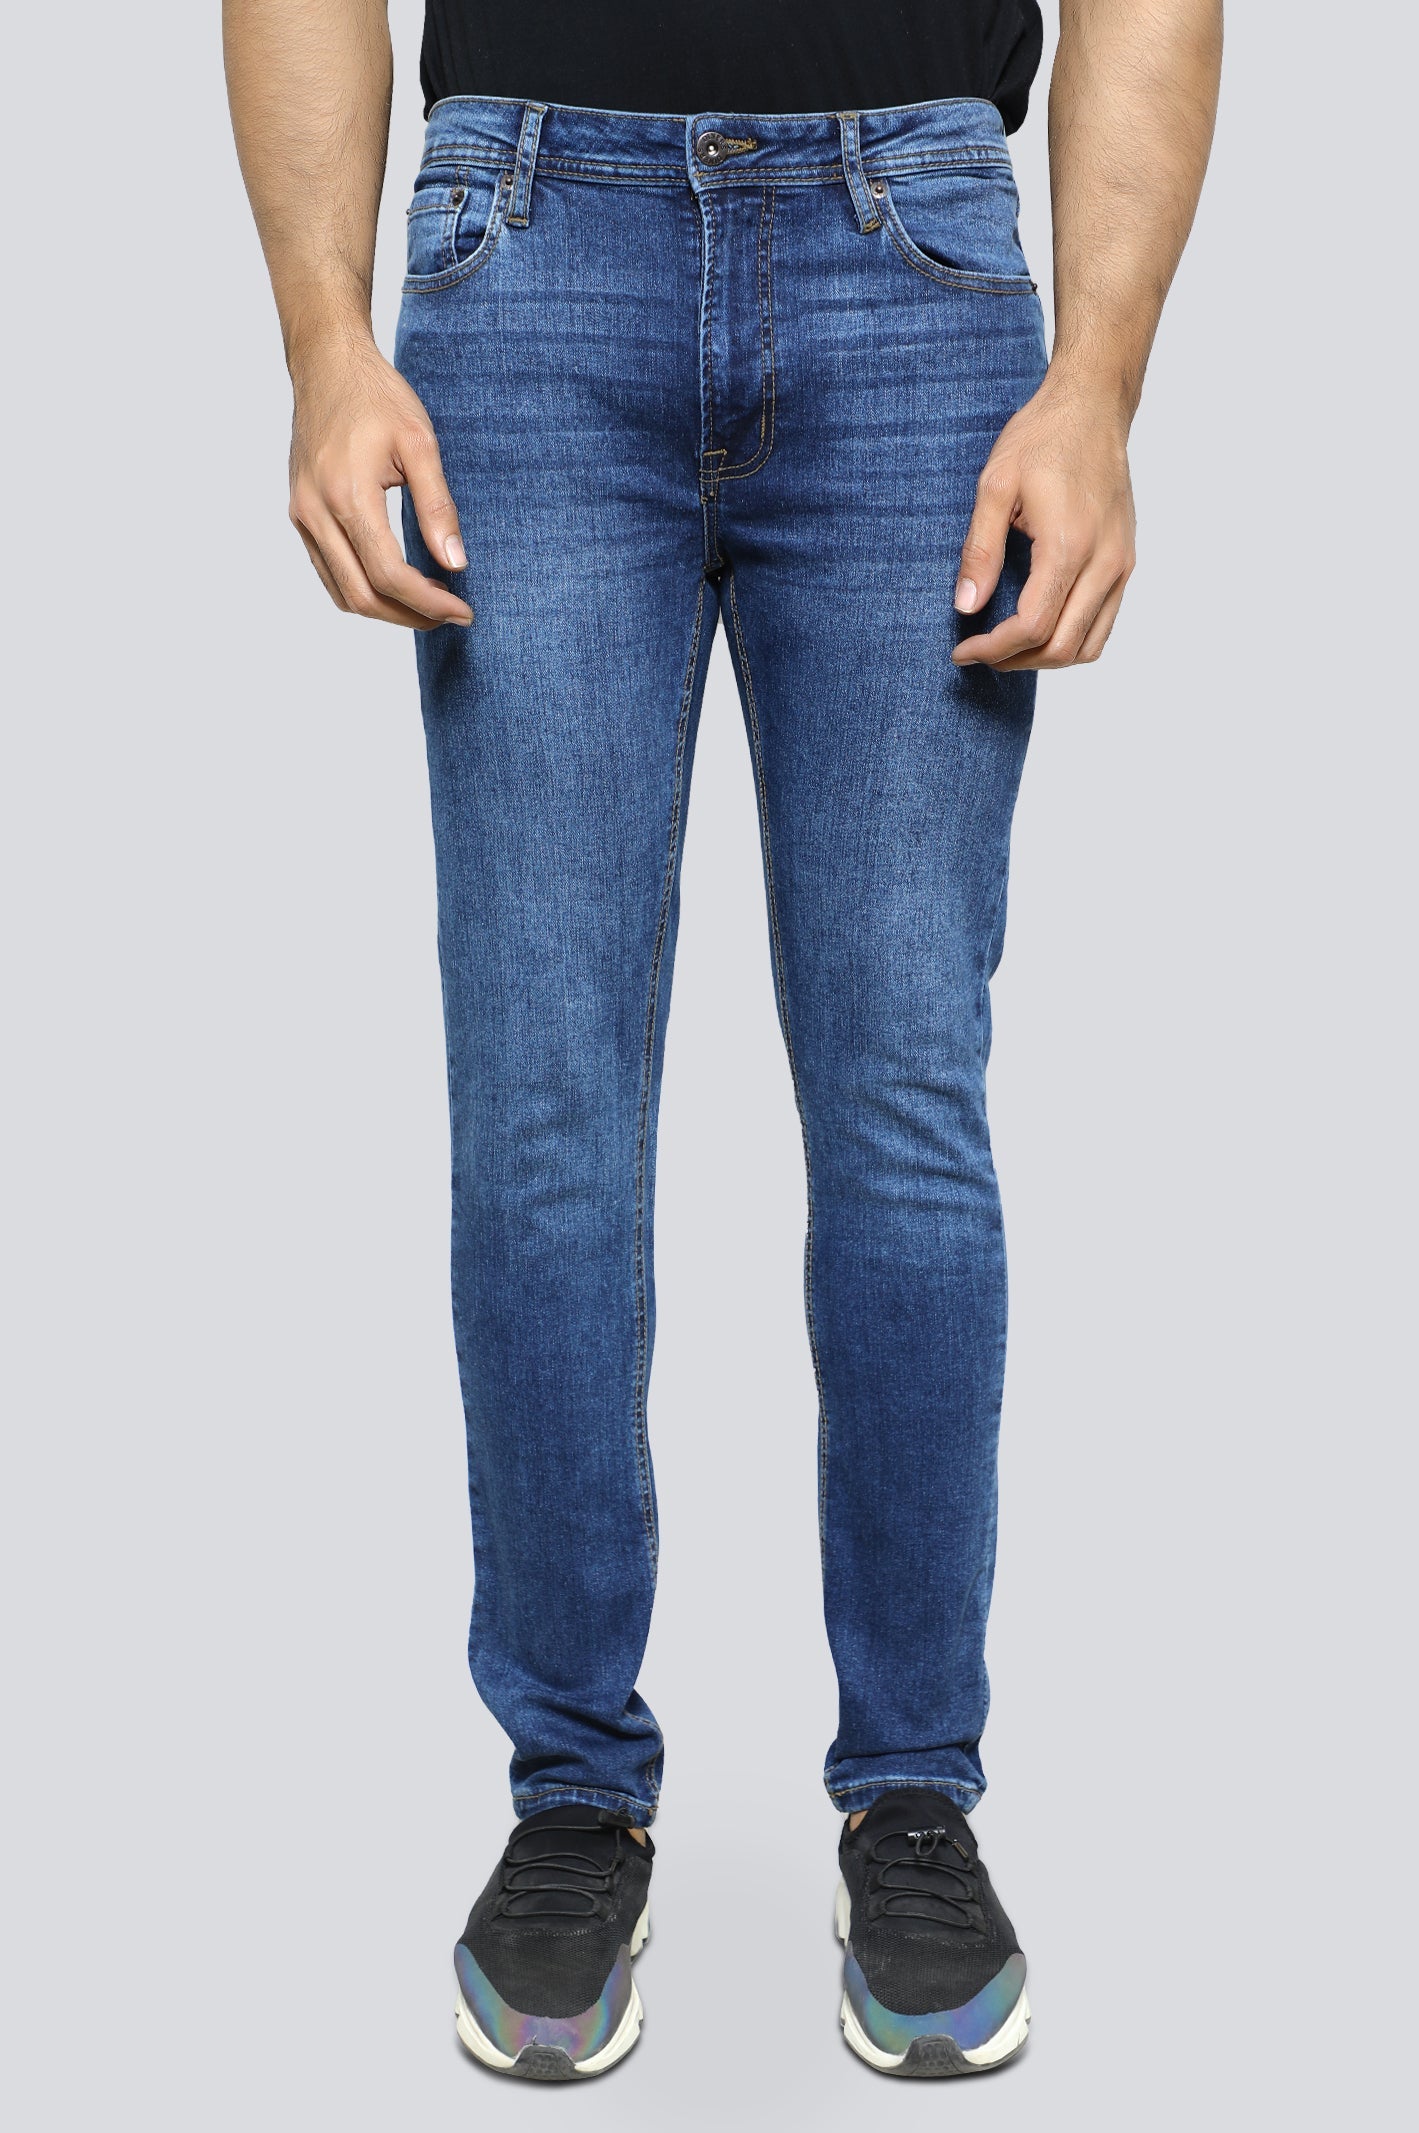 Casual Jeans For Men's - Diners